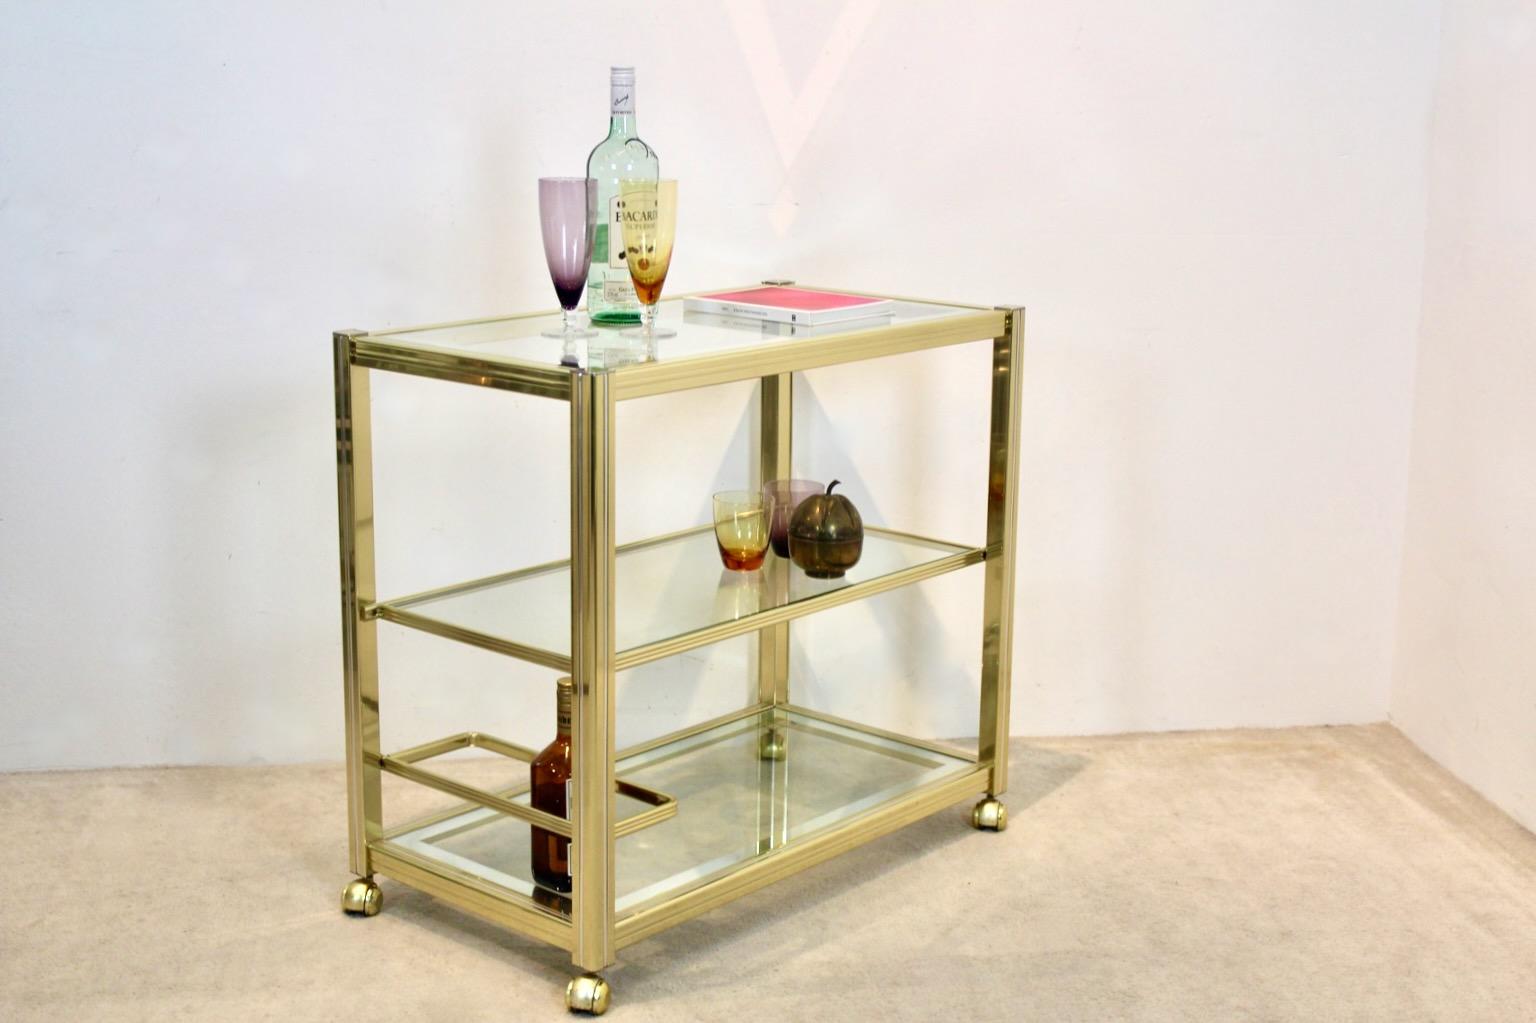 Extraoirdinary French Bar Cart in Brass with Chrome-Silver lining and Mirrored Glass. Designed and manufactured in France by Pierre Vandel in the ‘70s. The solid metal frame has a total original brass finish with elegant Chrome-Silver lining. The